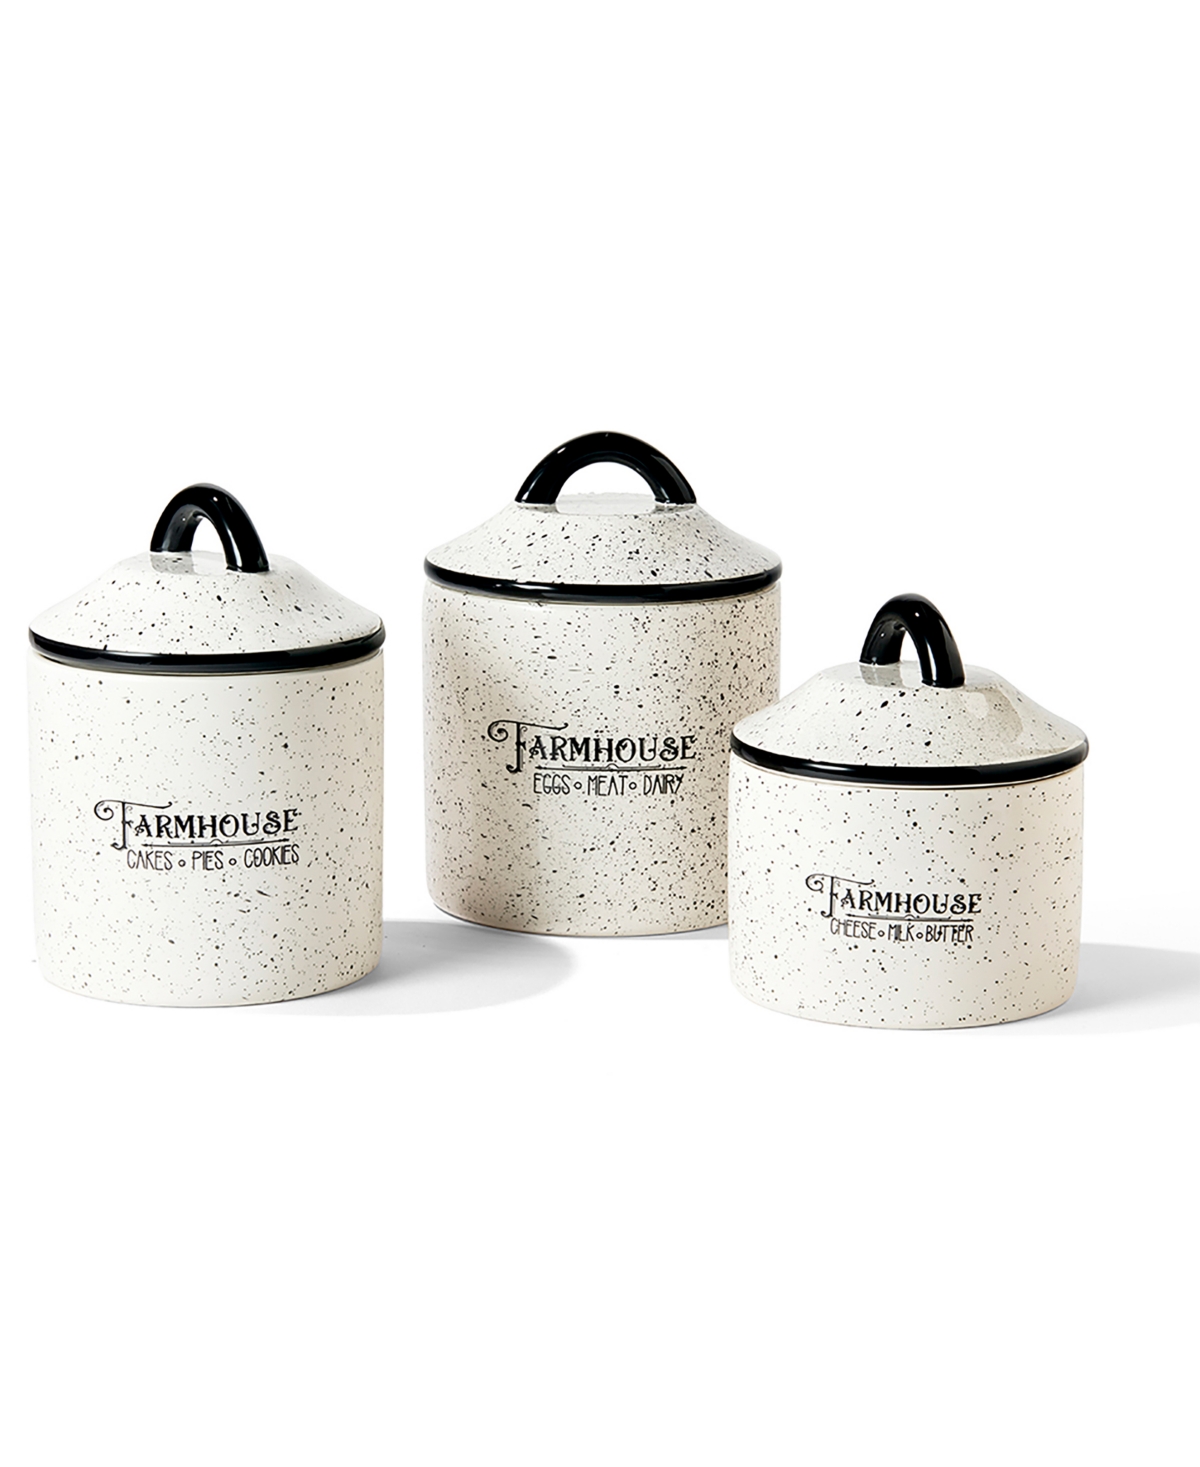 Jay Imports Farm House 3 Piece Canister Set In White